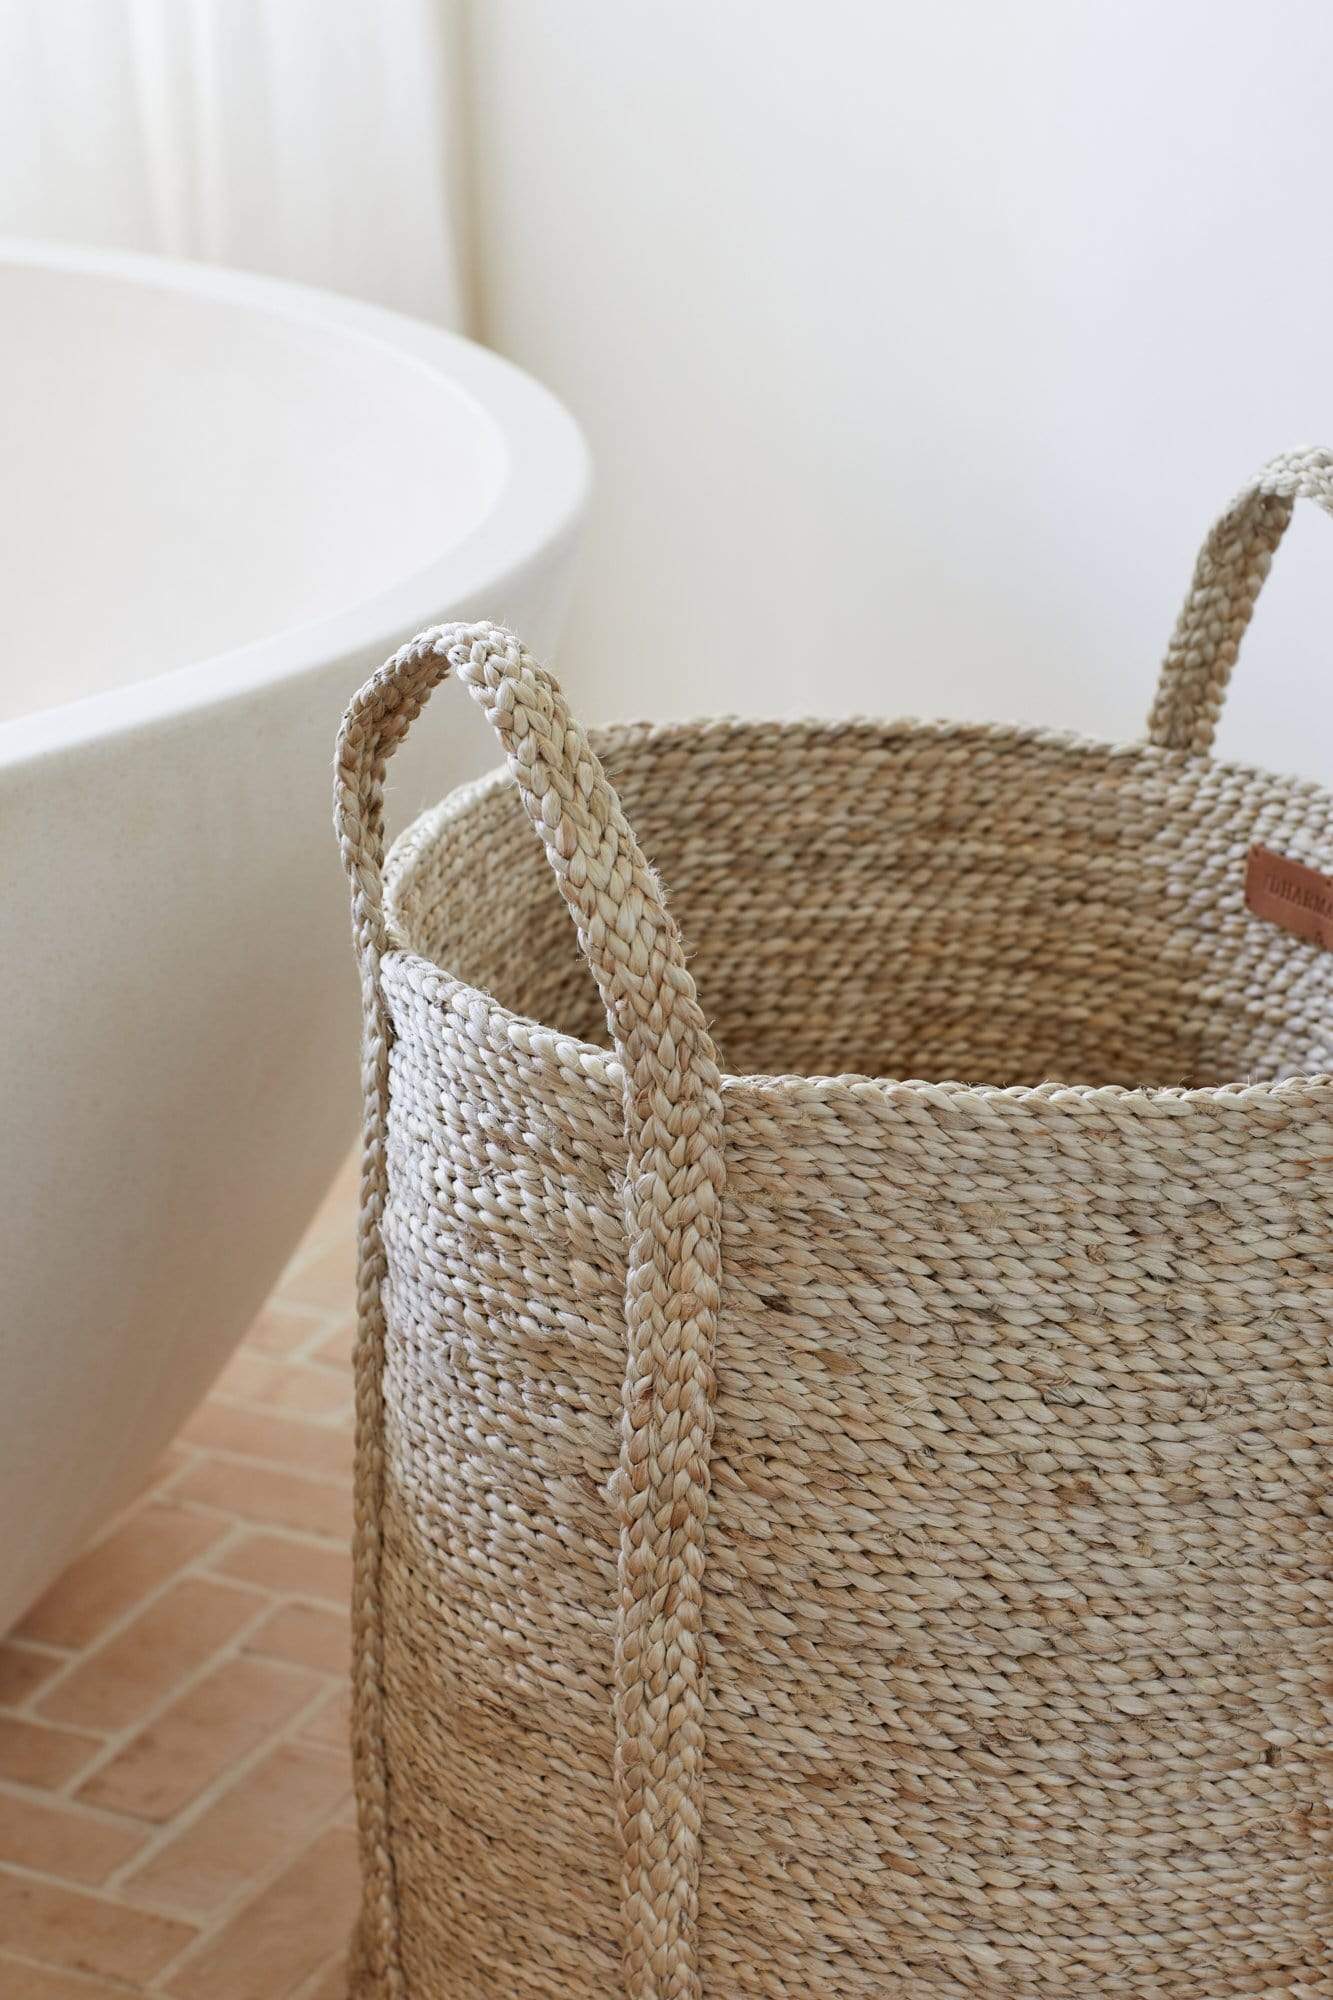 https://cdn.shopify.com/s/files/1/2036/0723/products/the-dharma-door-baskets-and-storage-jute-laundry-basket-natural-14678900932675_1600x.jpg?v=1627831338